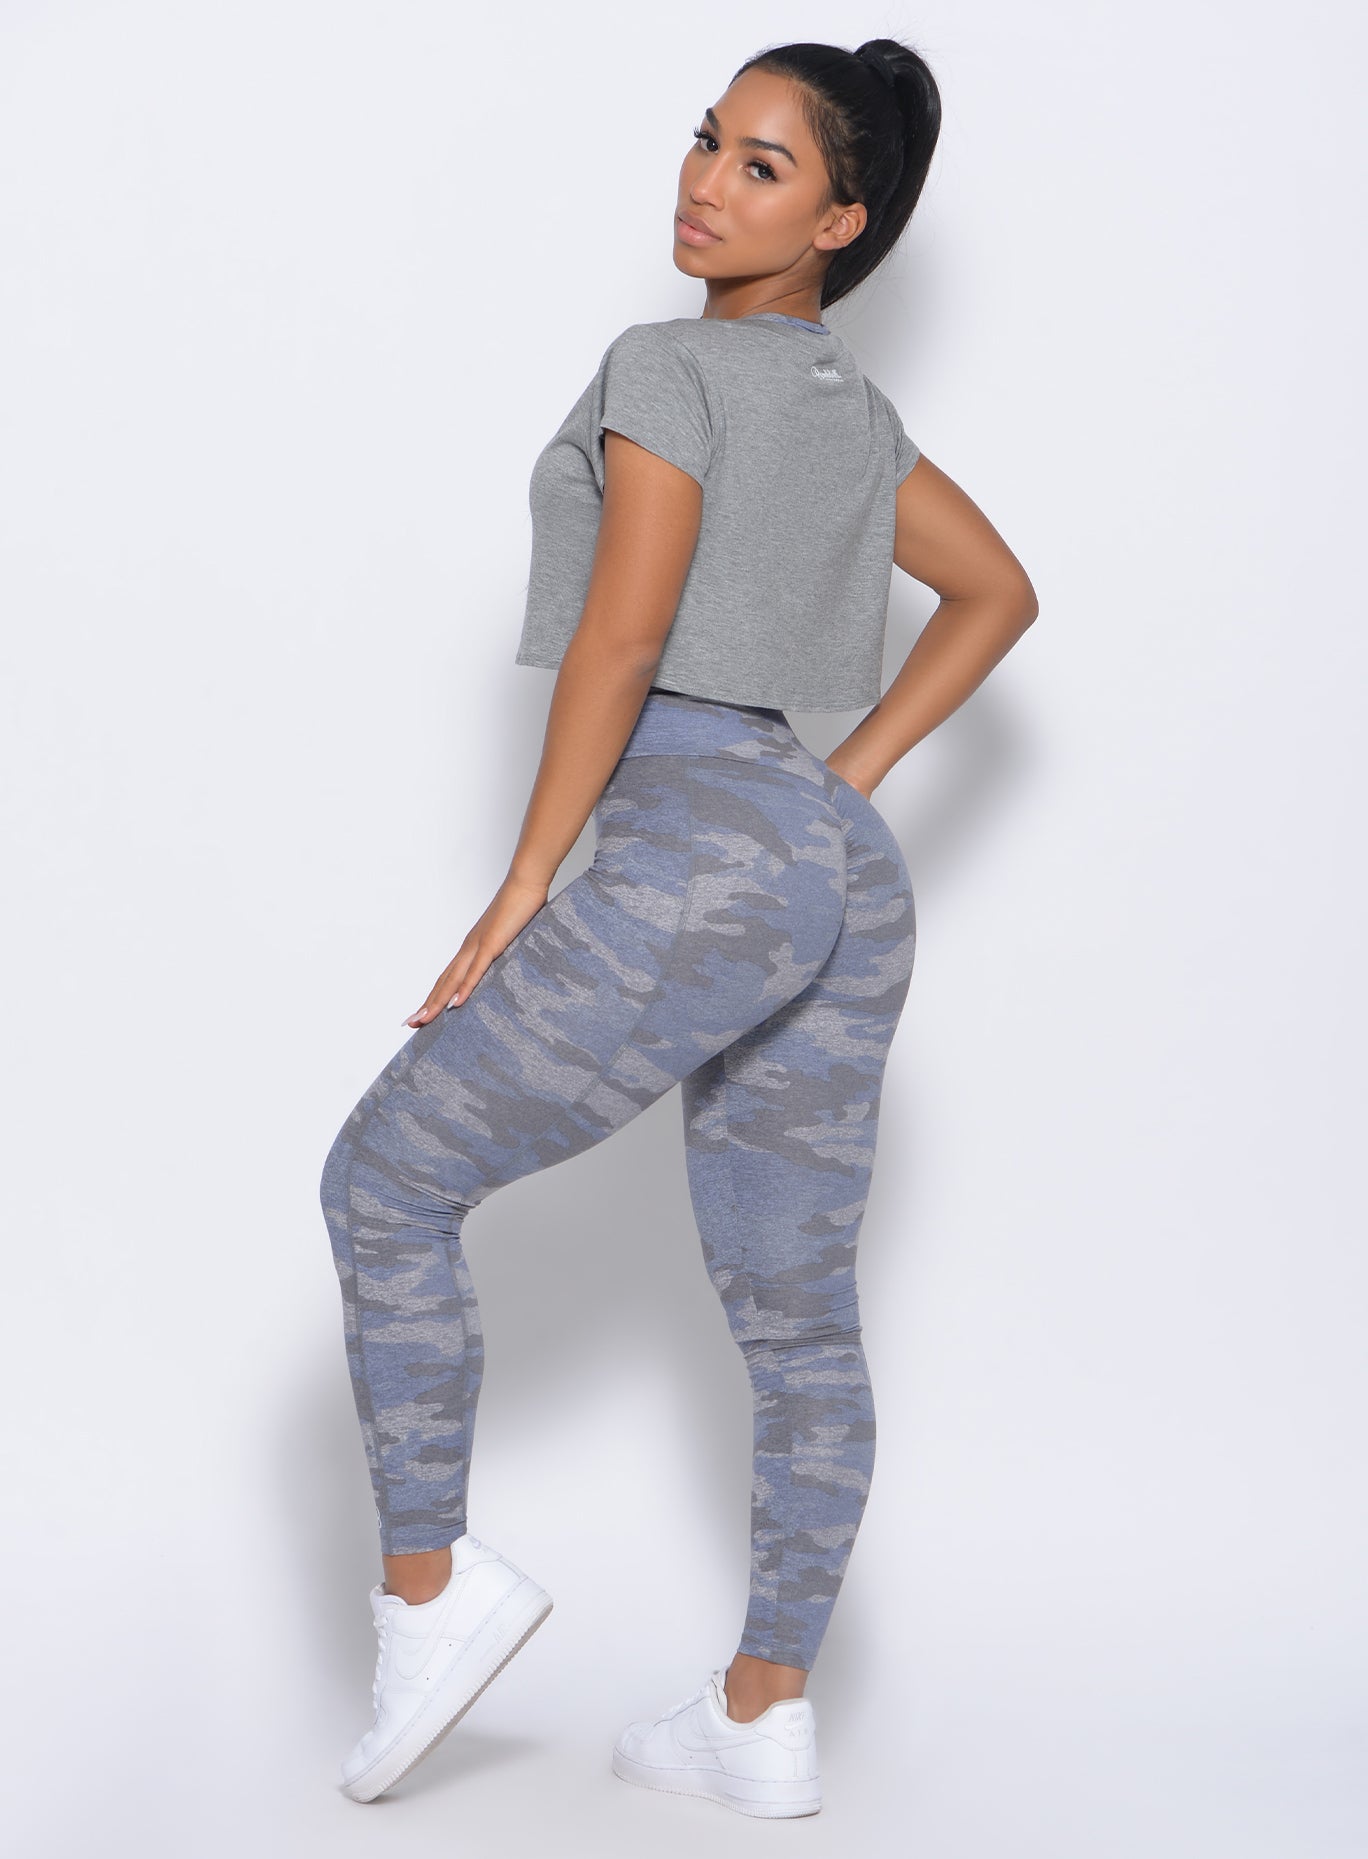 Left side view of the model wearing our brazilian contour leggings in silver camo and a matching bra